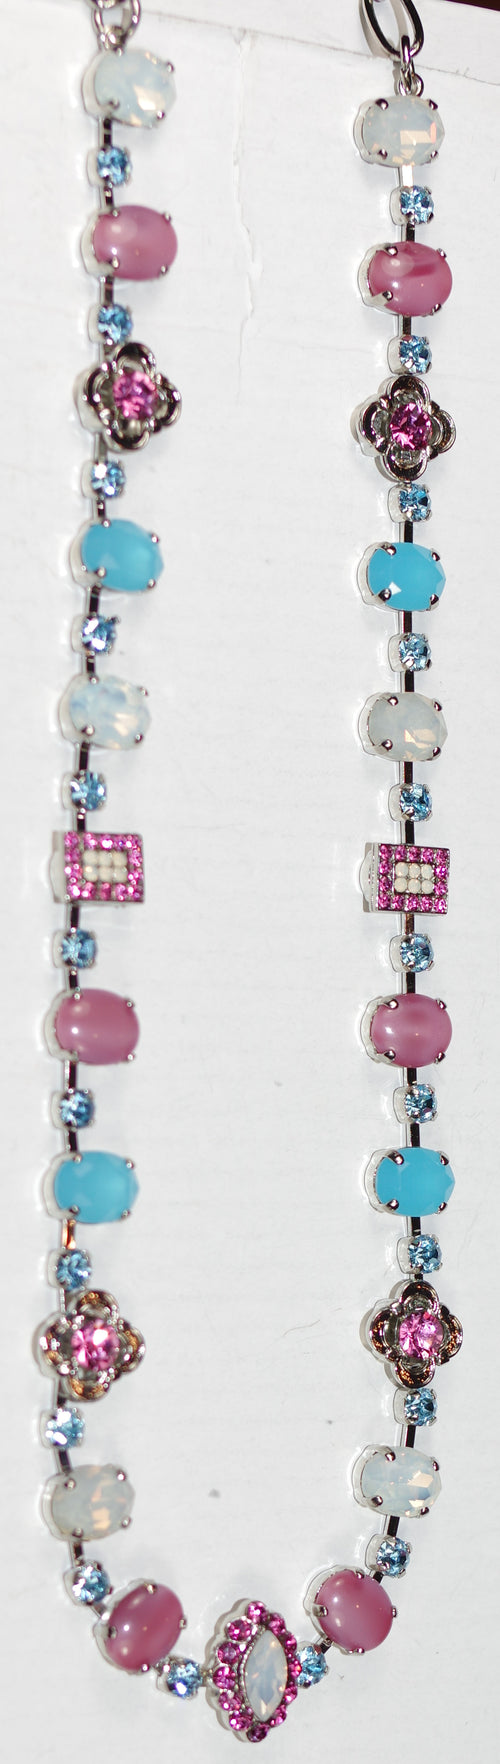 MARIANA NECKLACE BANANA SPLIT: blue, pink, white stones in silver rhodium setting, 1" center pendant, 20" adjustable chain